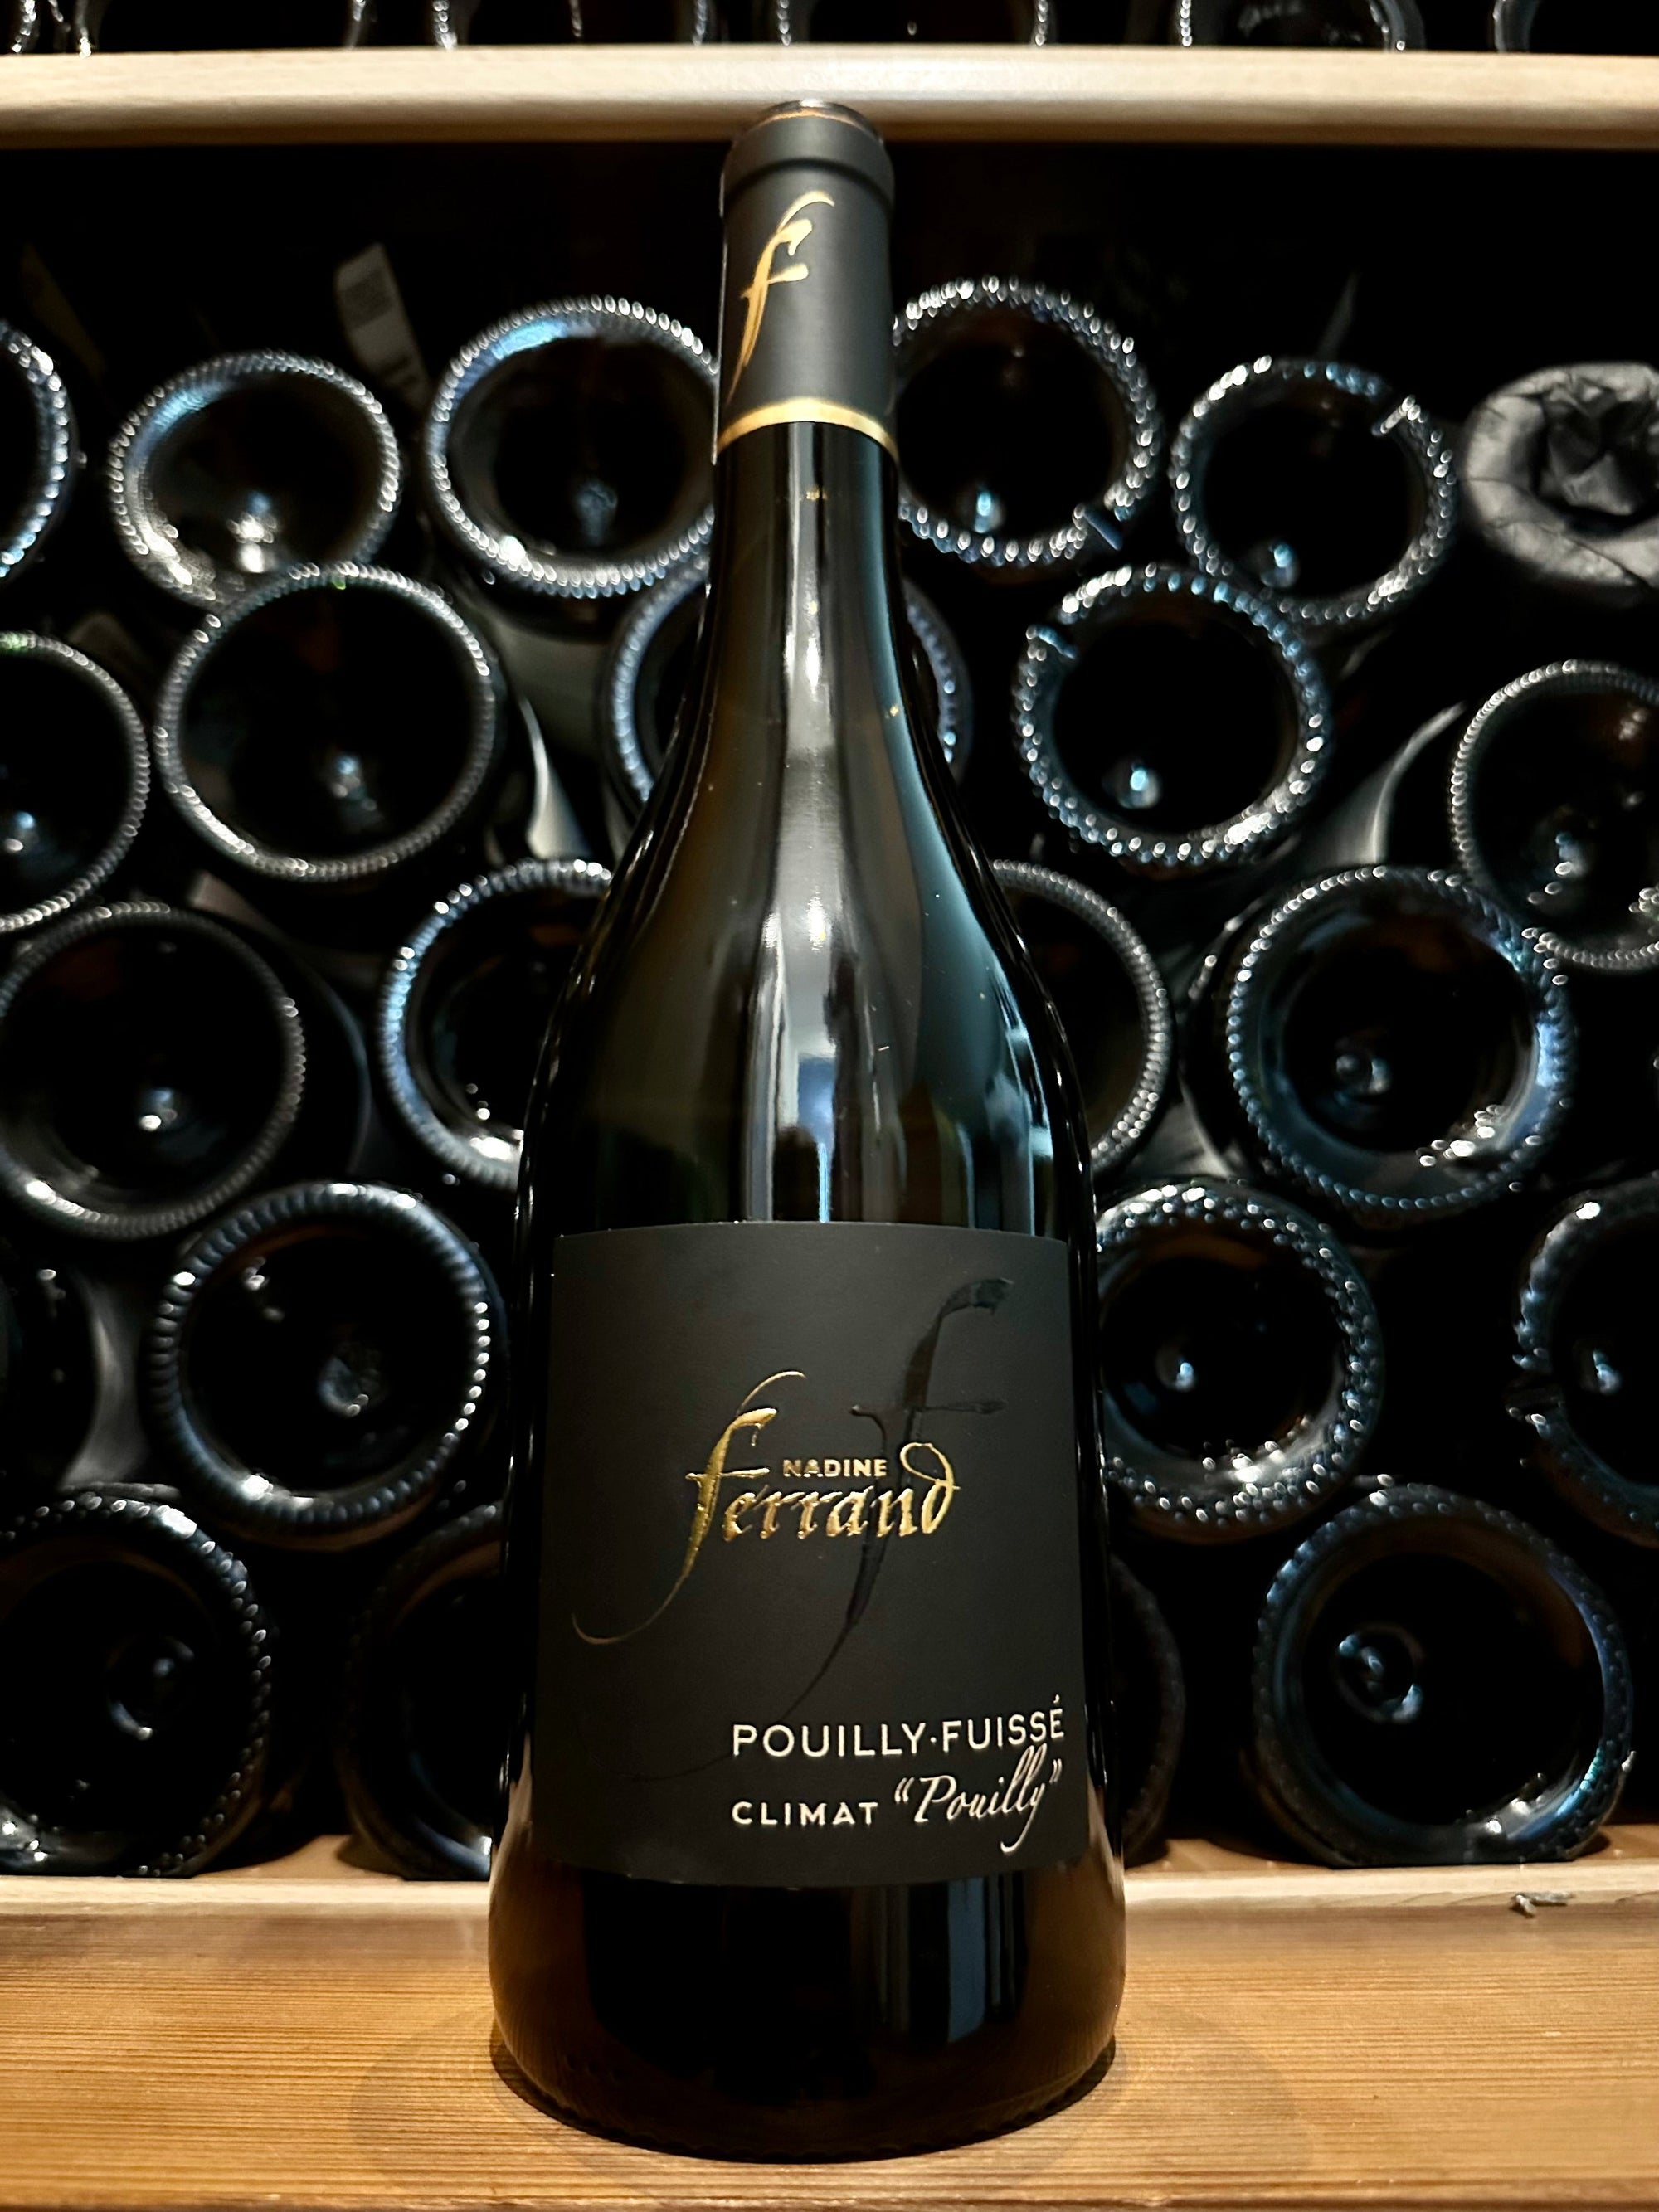 Domaine Nadine Ferrand Pouilly-Fuisse Climat Pouilly 2019